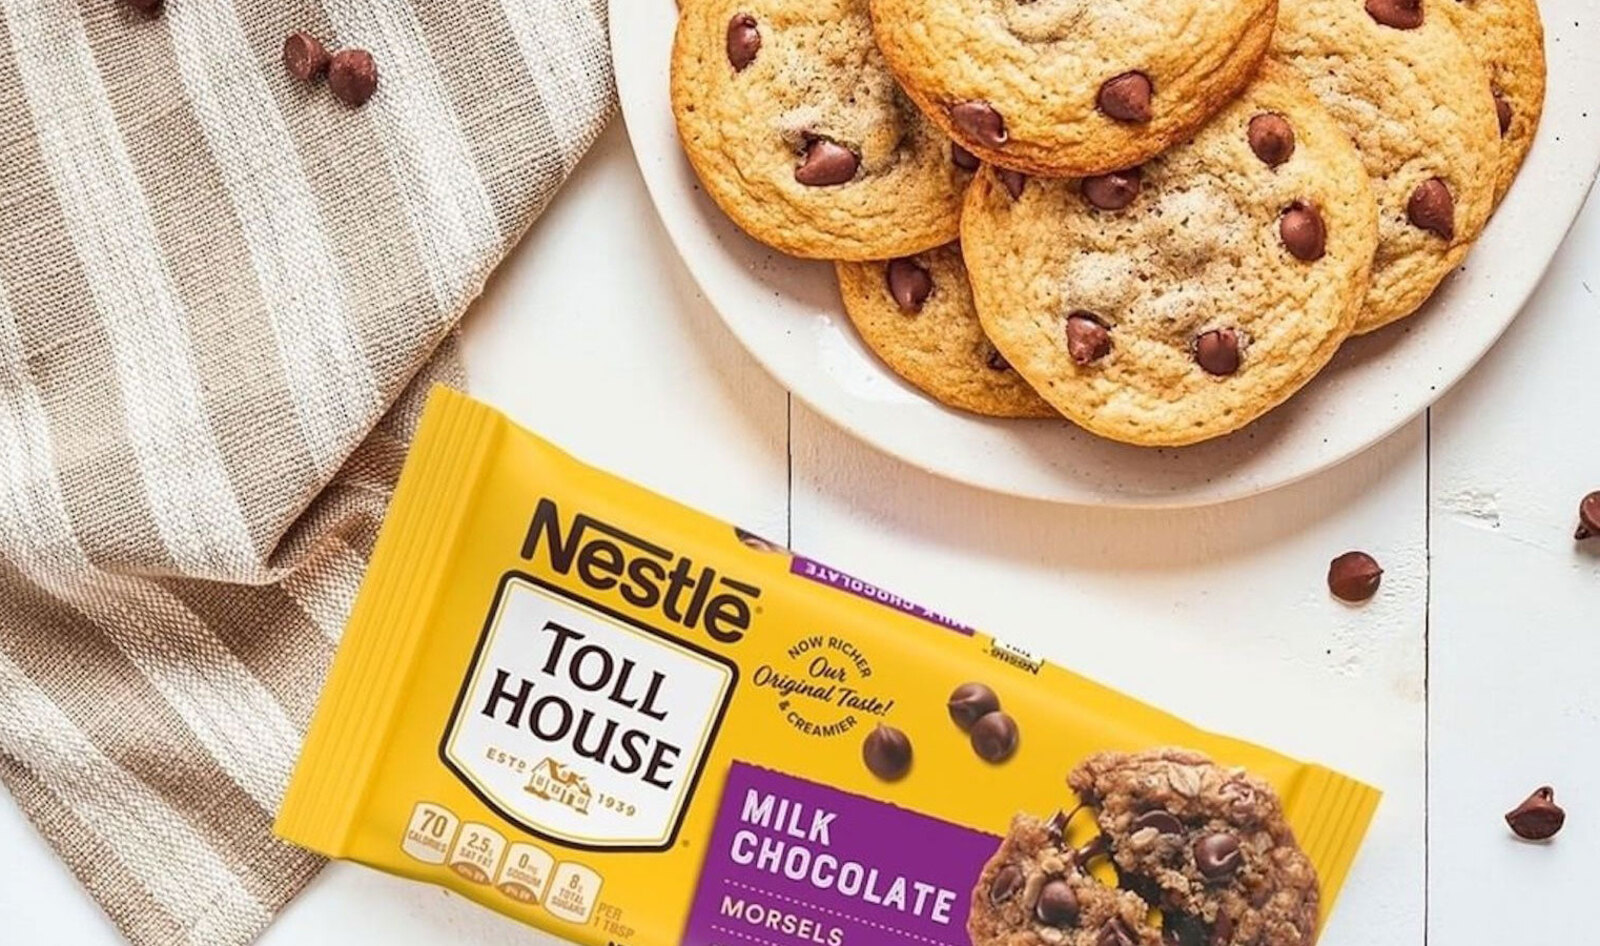 Nestlé Hints at a Vegan Future With 3 New Plant-Based Categories